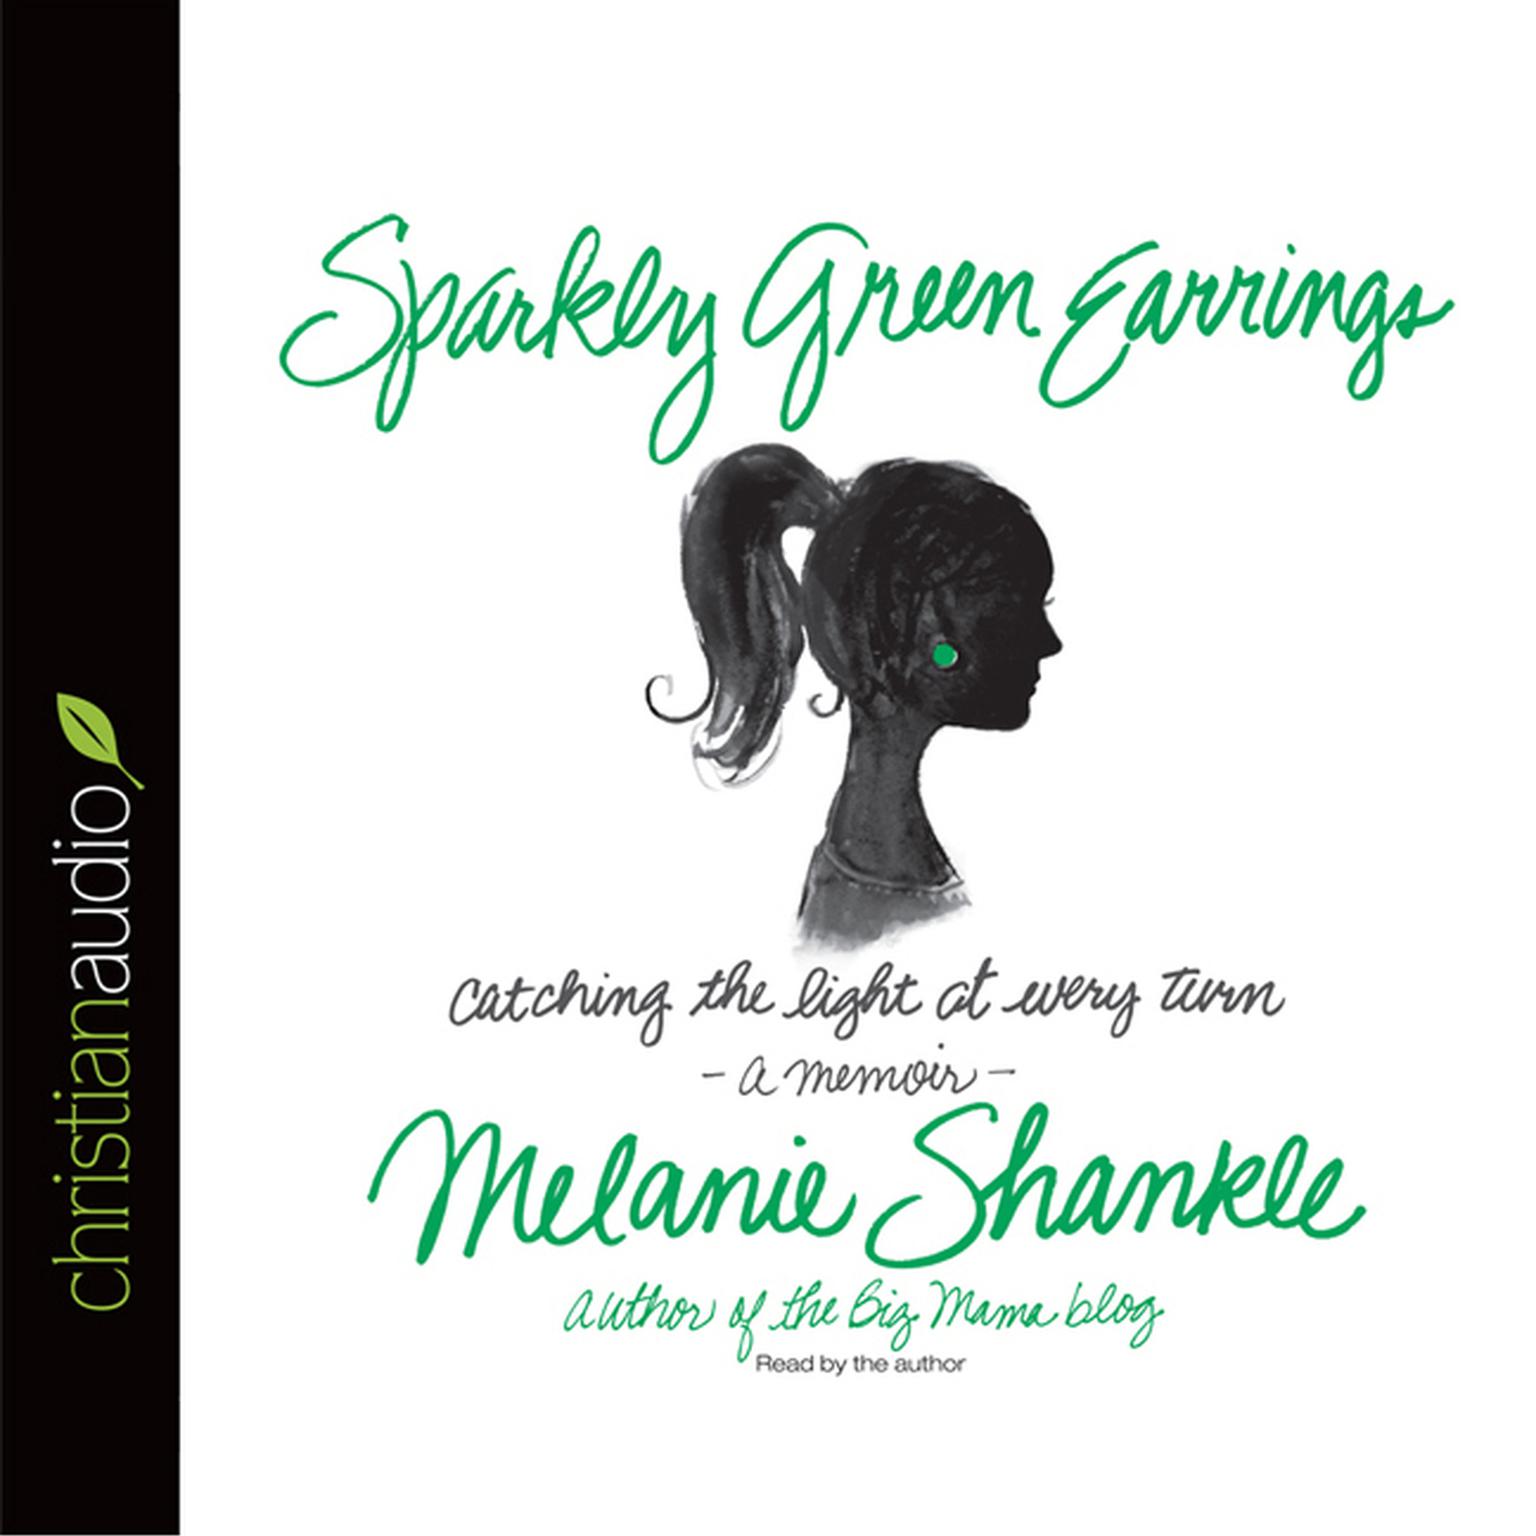 Sparkly Green Earrings: Catching the Light at Every Turn by Melanie Shankle Audiobook, by Melanie Shankle